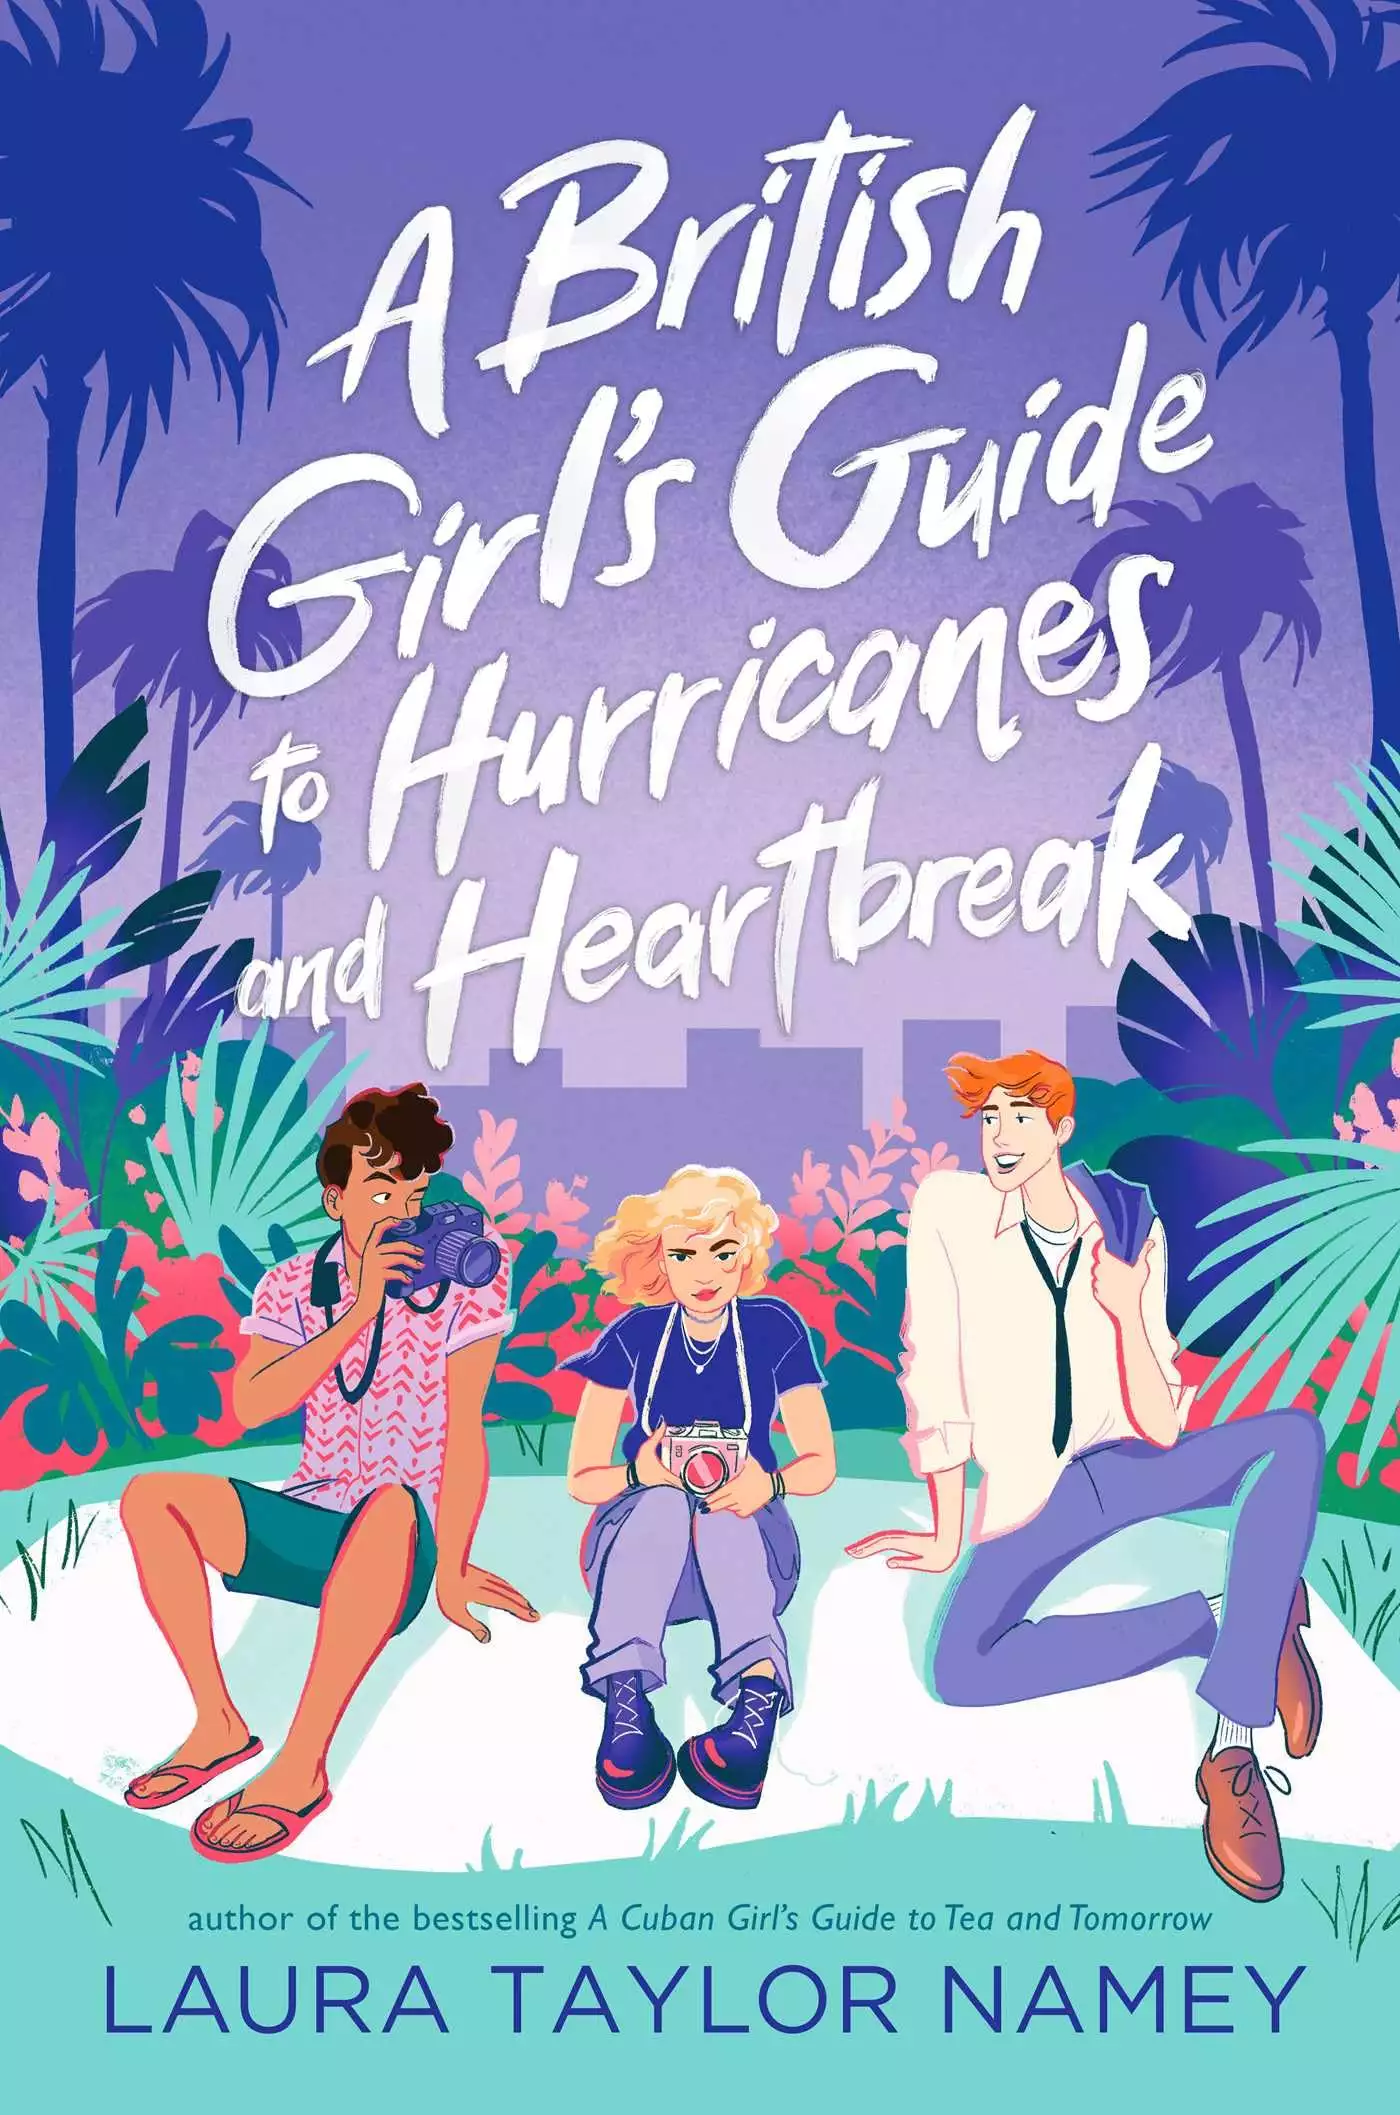 British Girl's Guide to Hurricanes and Heartbreak